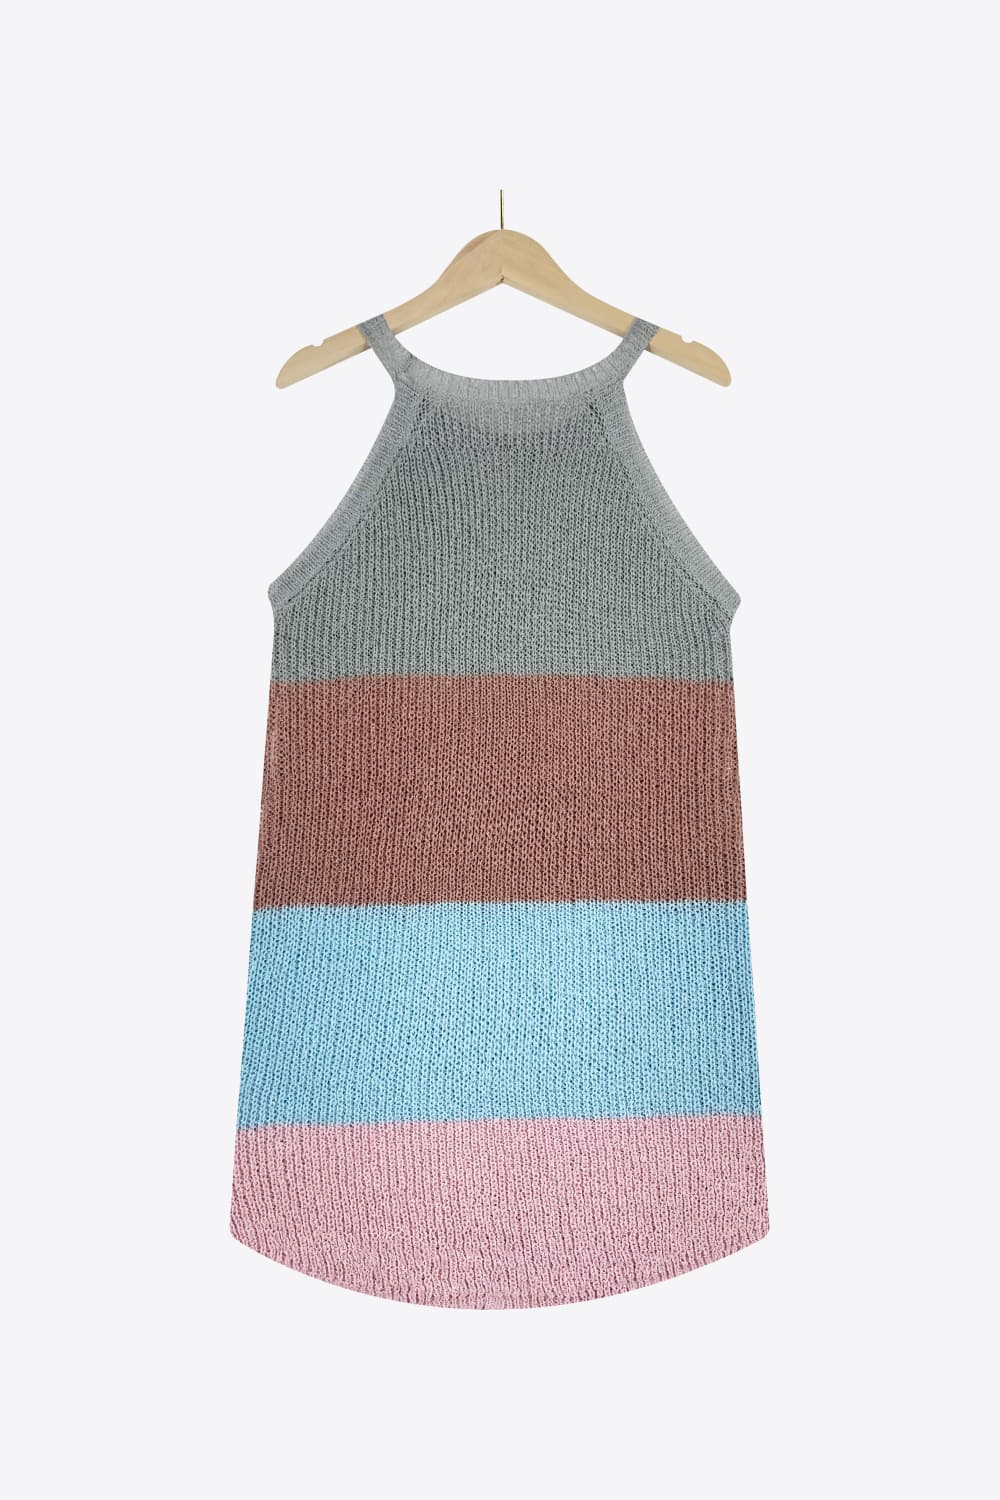 Women’s Color Block Round Neck Sleeveless Knit Top